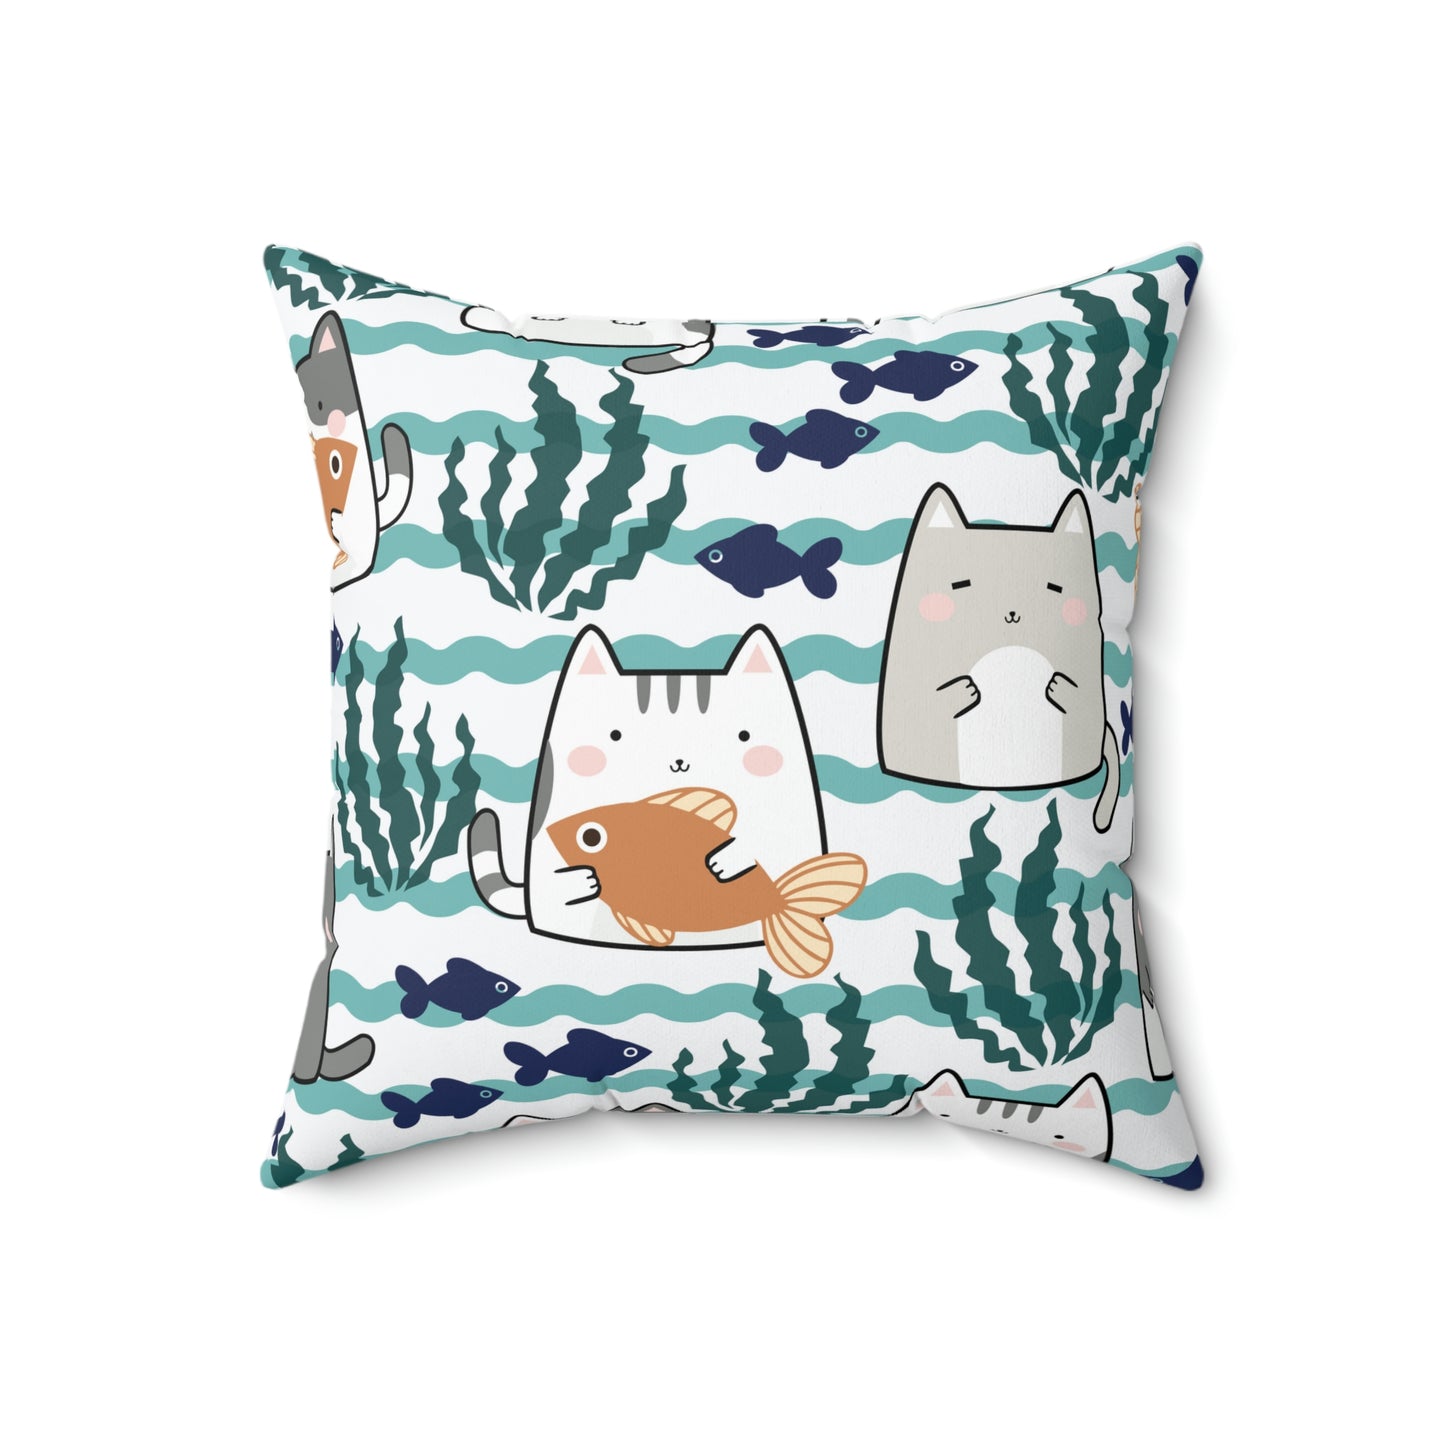 Kawaii Cats and Fishes Spun Polyester Square Pillow